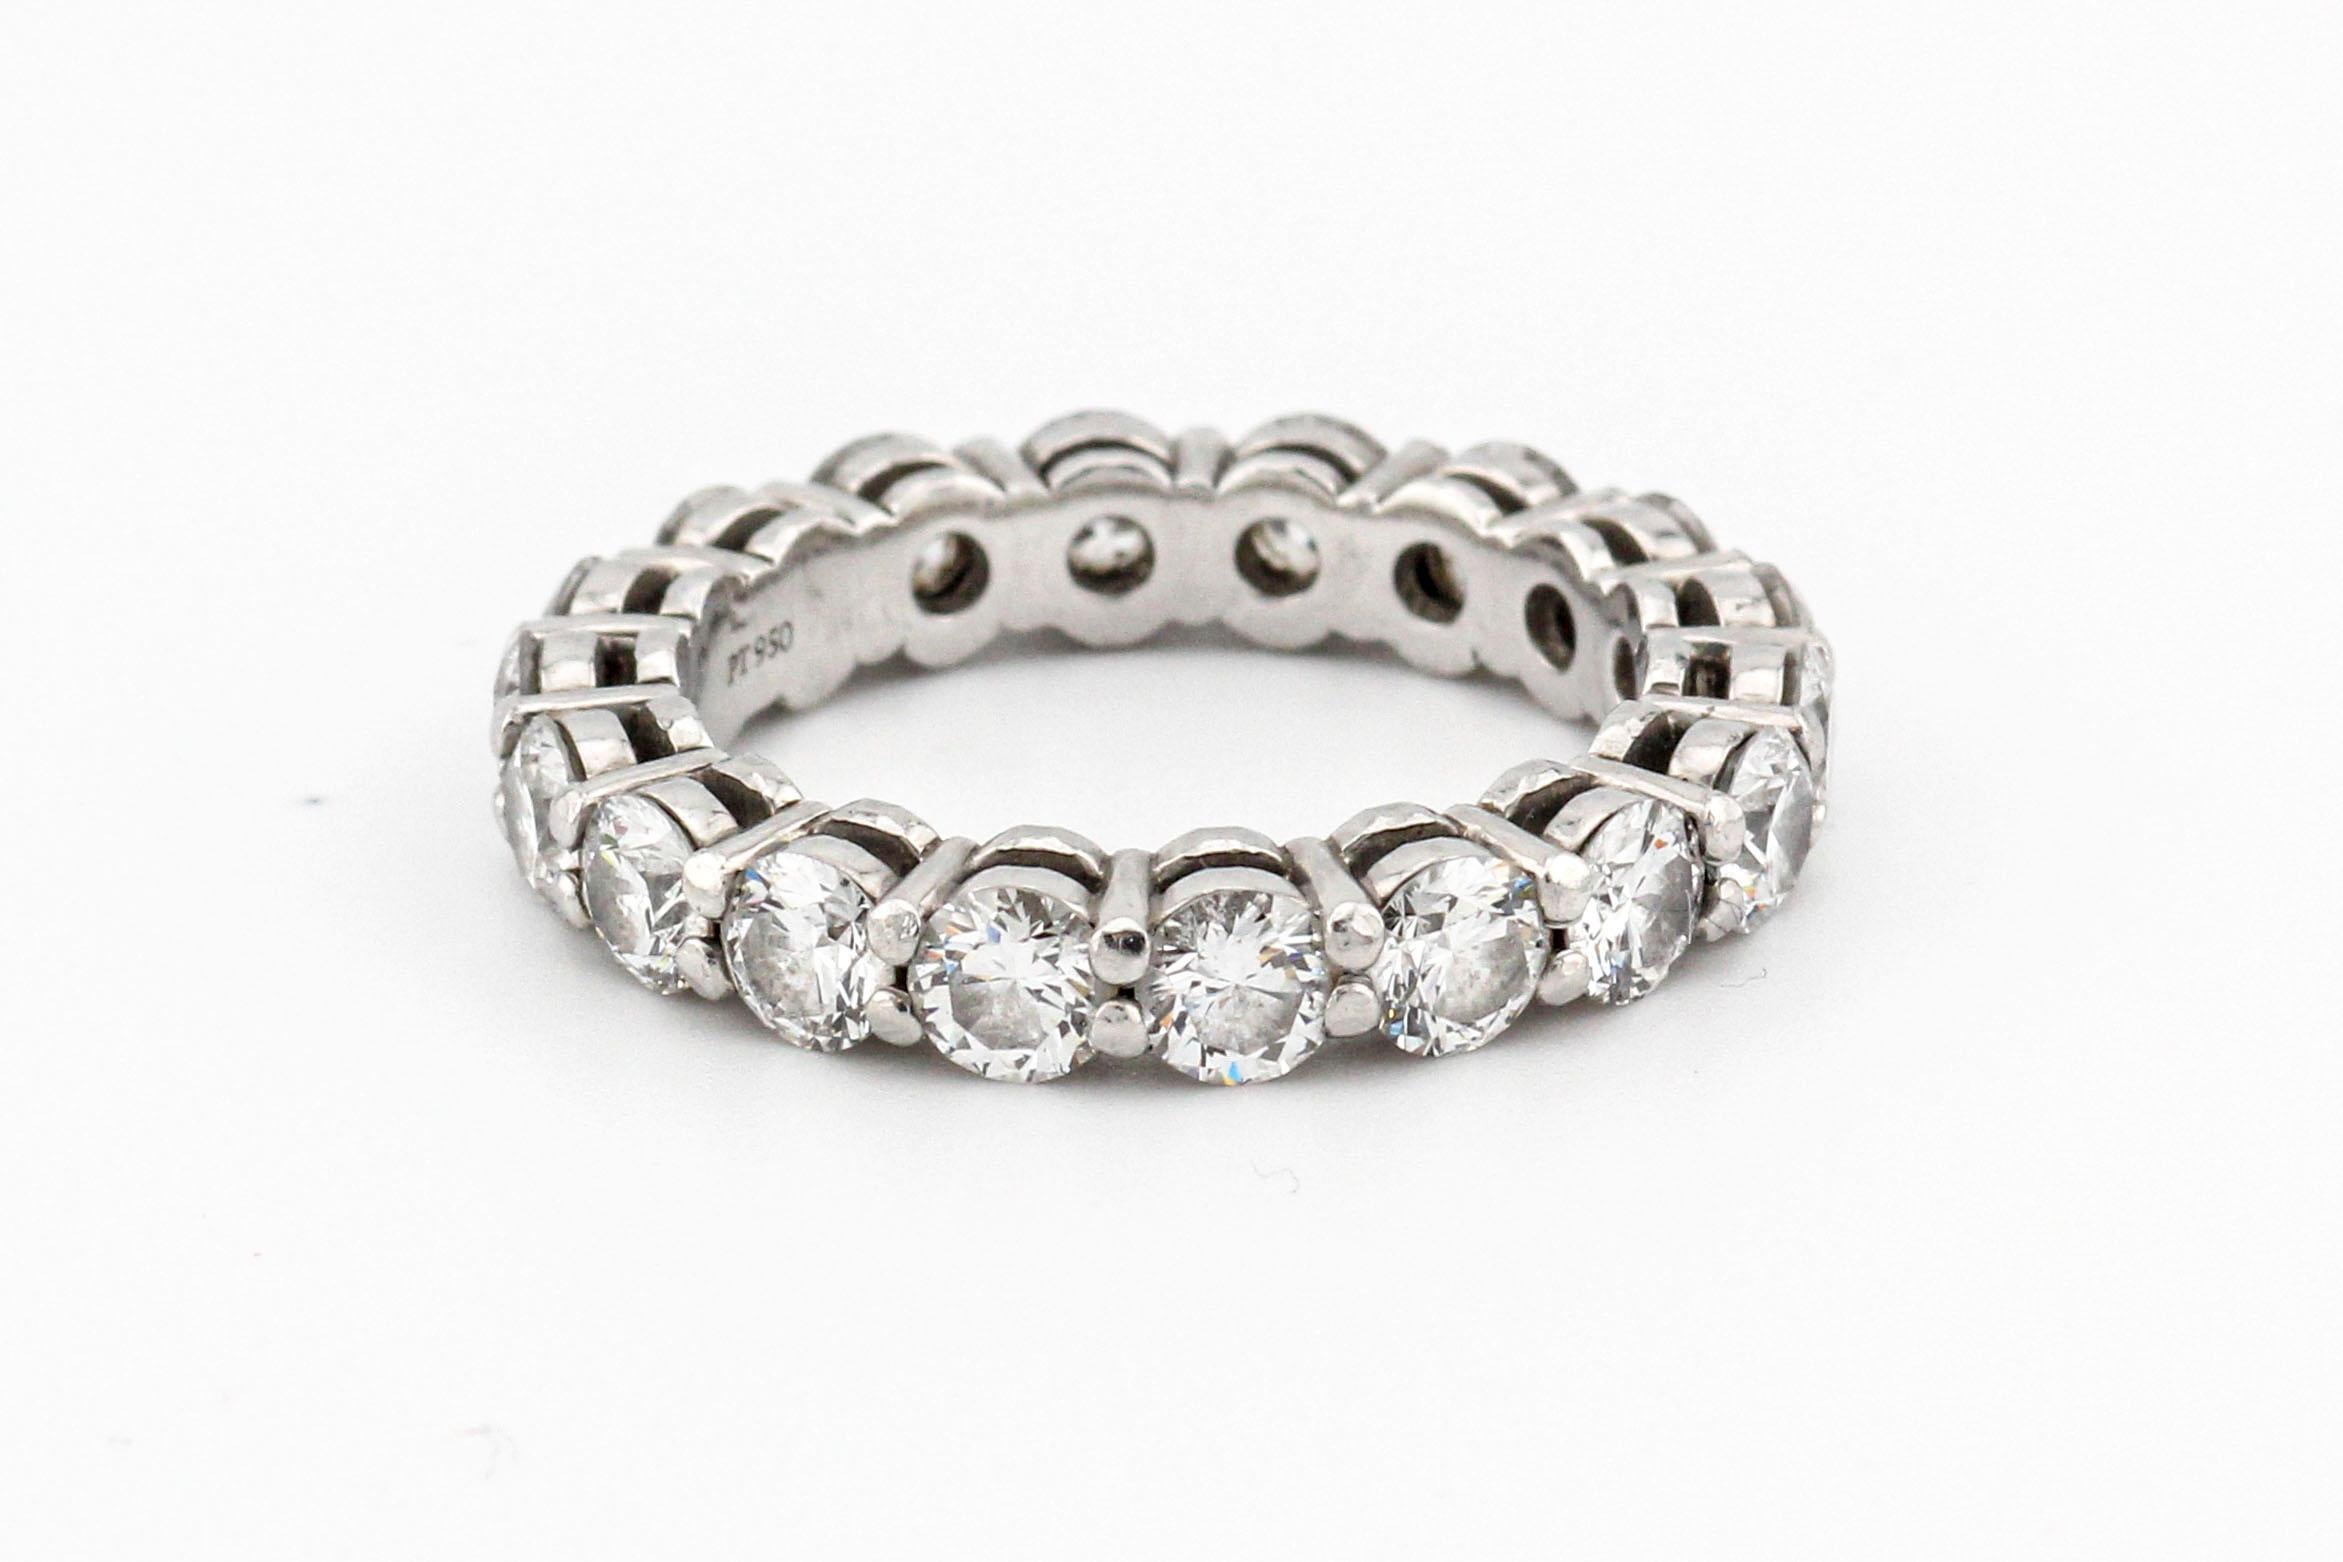 The Tiffany & Co. Diamond Platinum 3.7mm Shared Setting Band is a magnificent piece of jewelry that embodies timeless elegance and exquisite craftsmanship. Crafted by one of the world's most renowned luxury jewelry brands, this ring is a true symbol